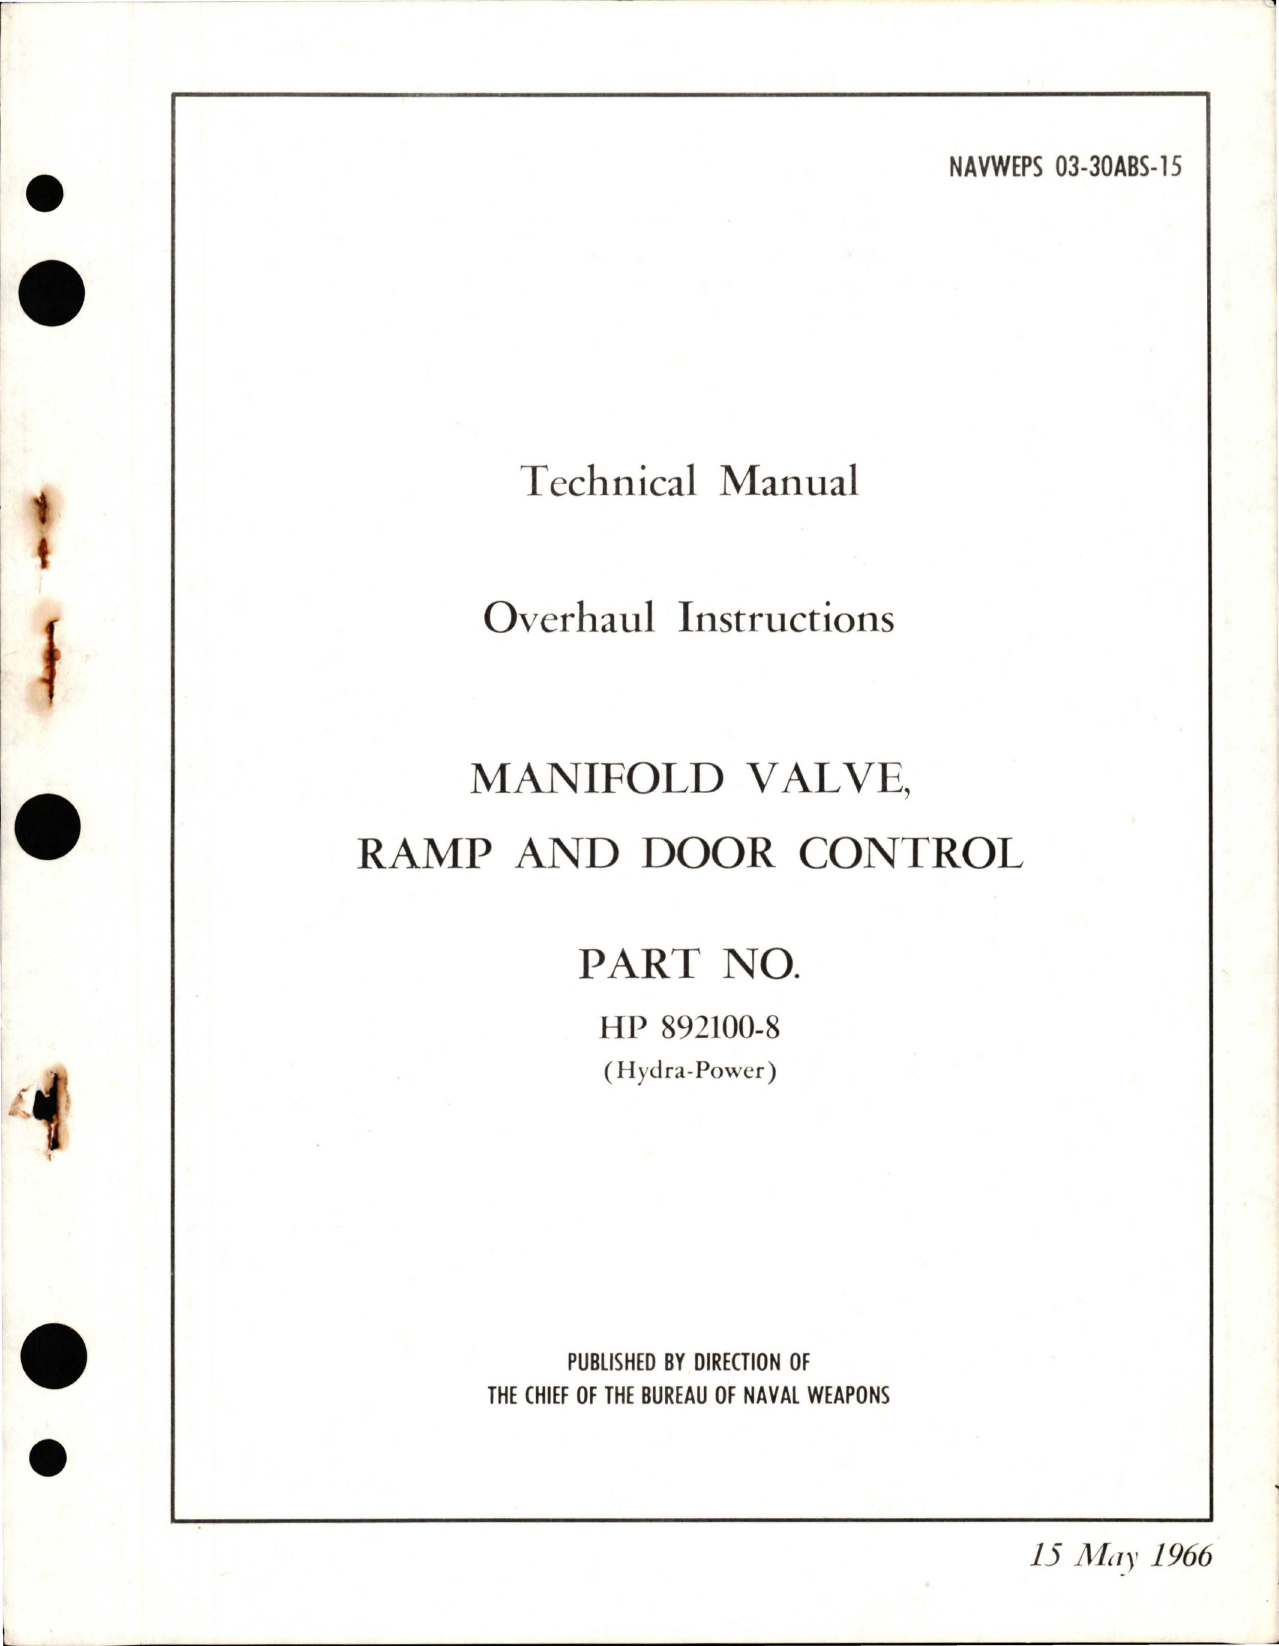 Sample page 1 from AirCorps Library document: Overhaul Instructions for Ramp & Door Control Manifold Valve - Part HP 892100-8 